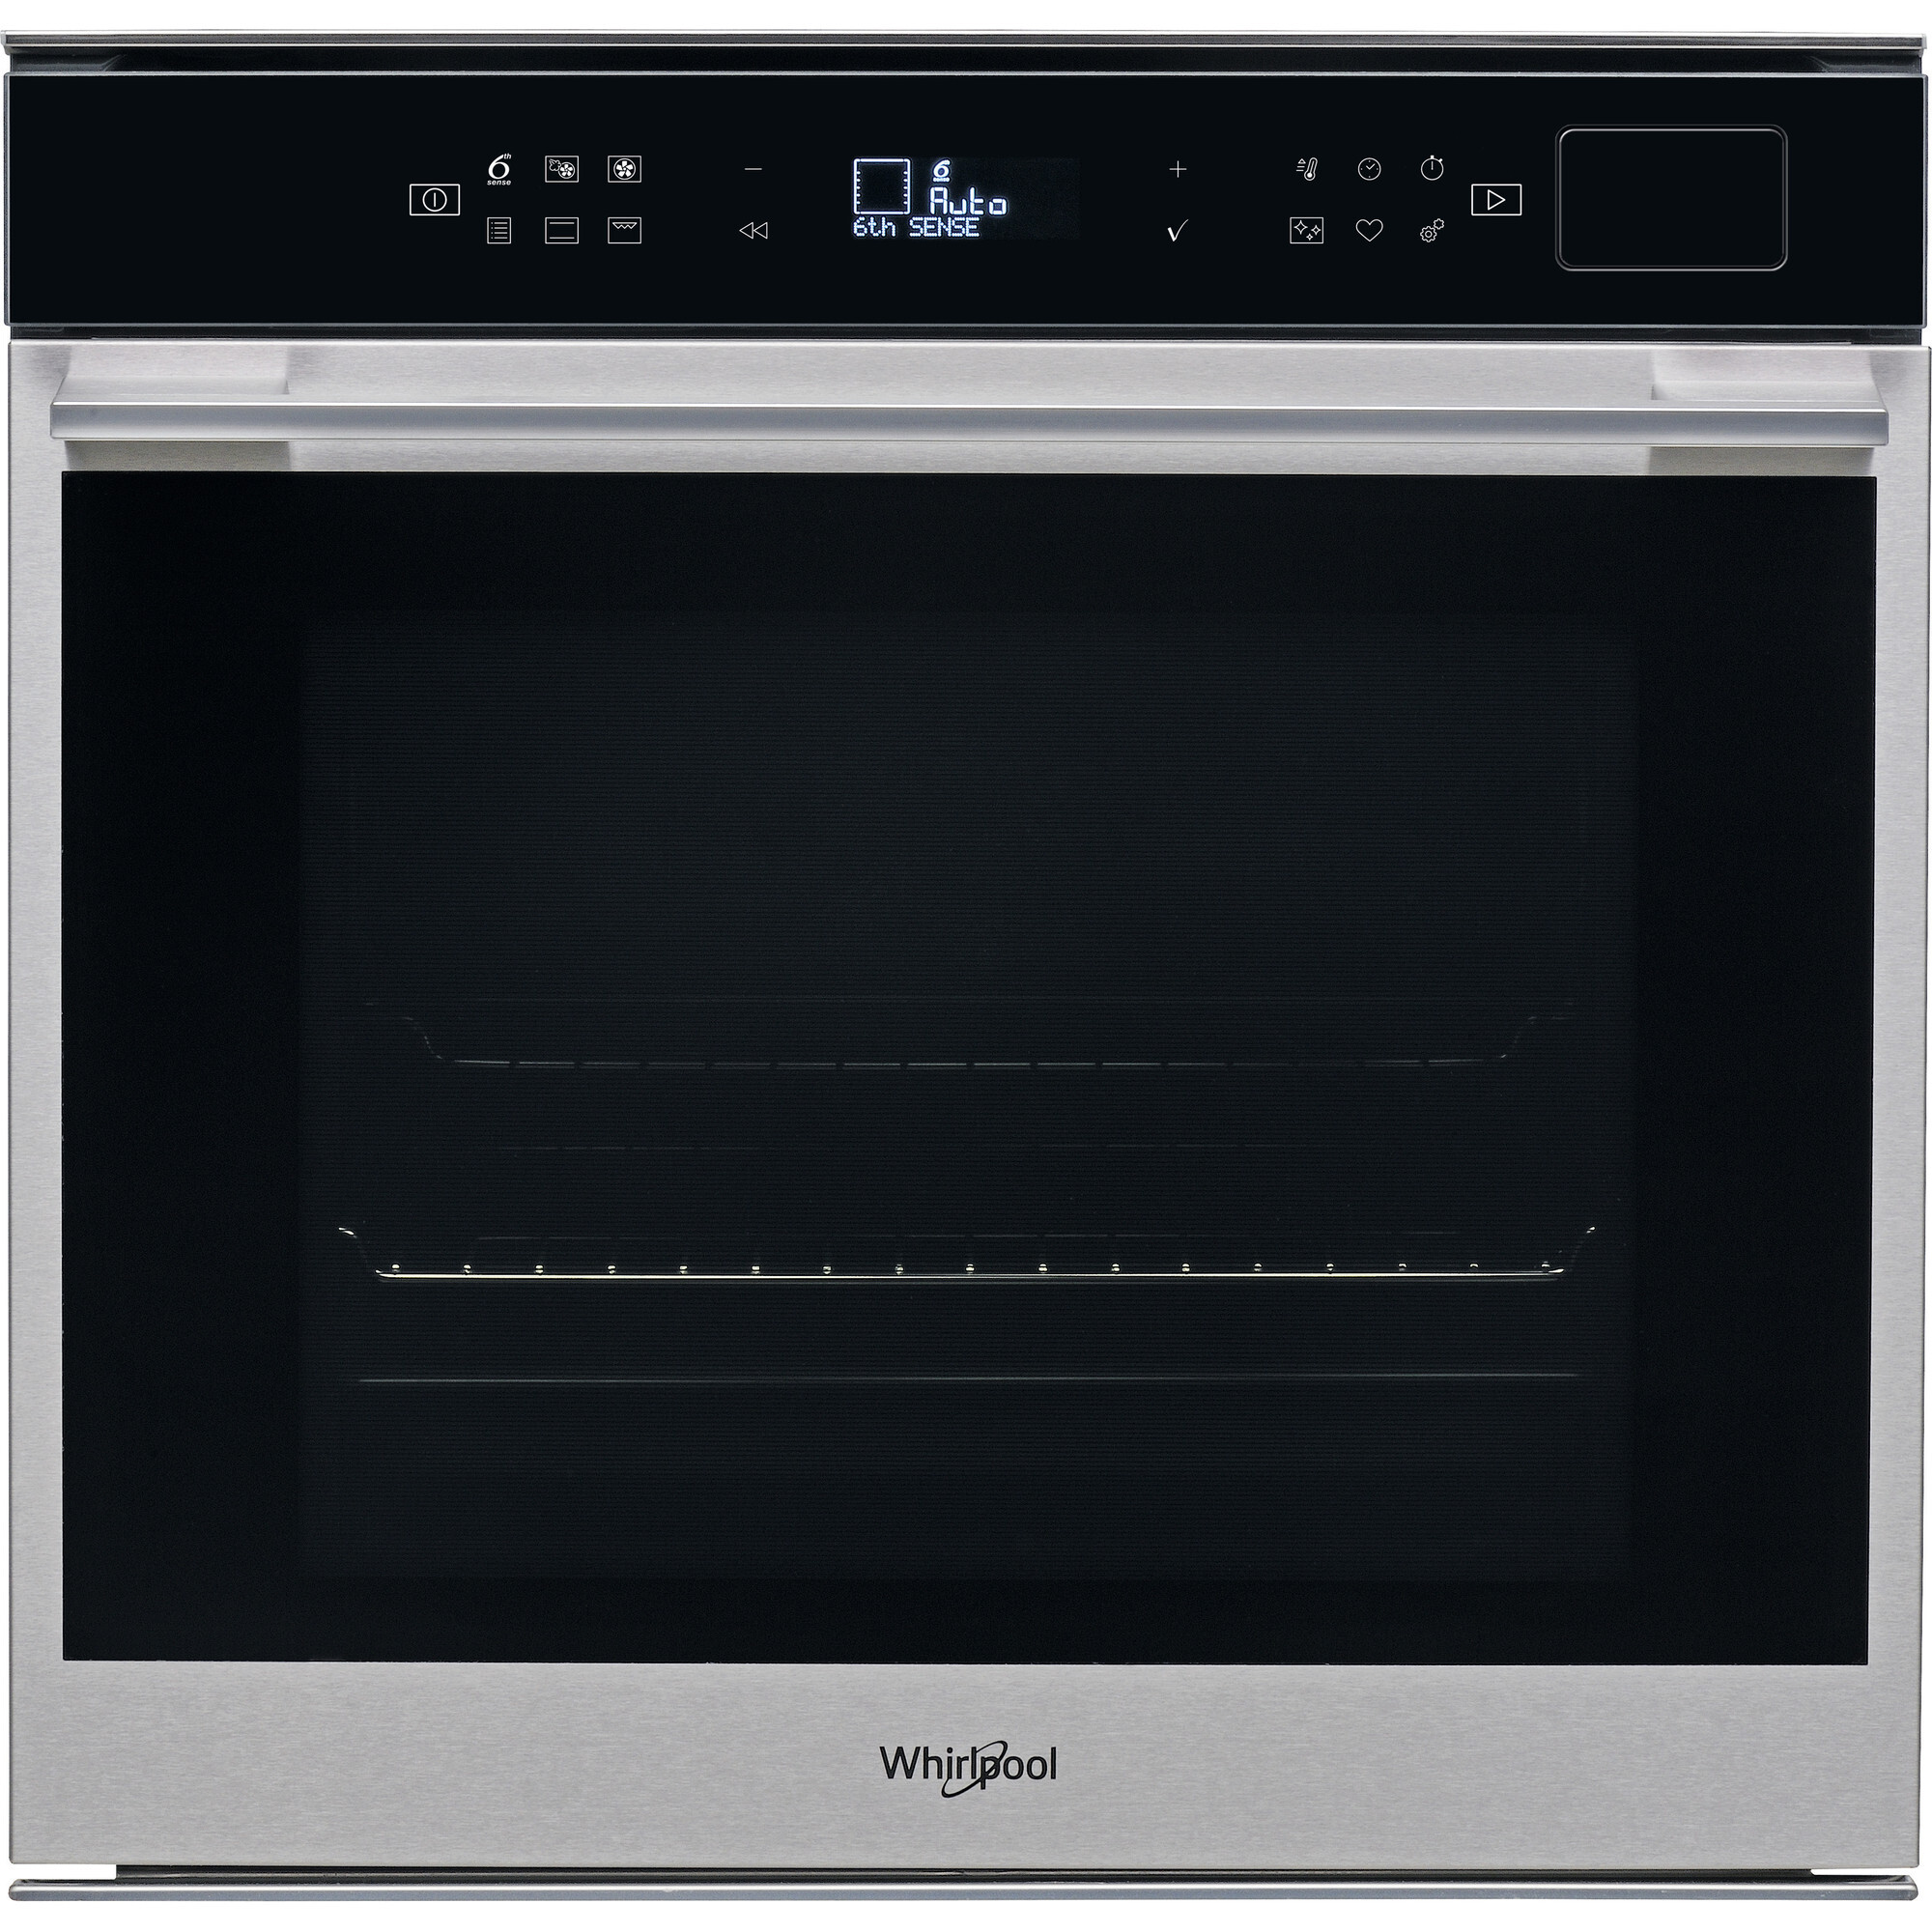 Whirlpool  W7 OS4 4S1 H OVEN WP